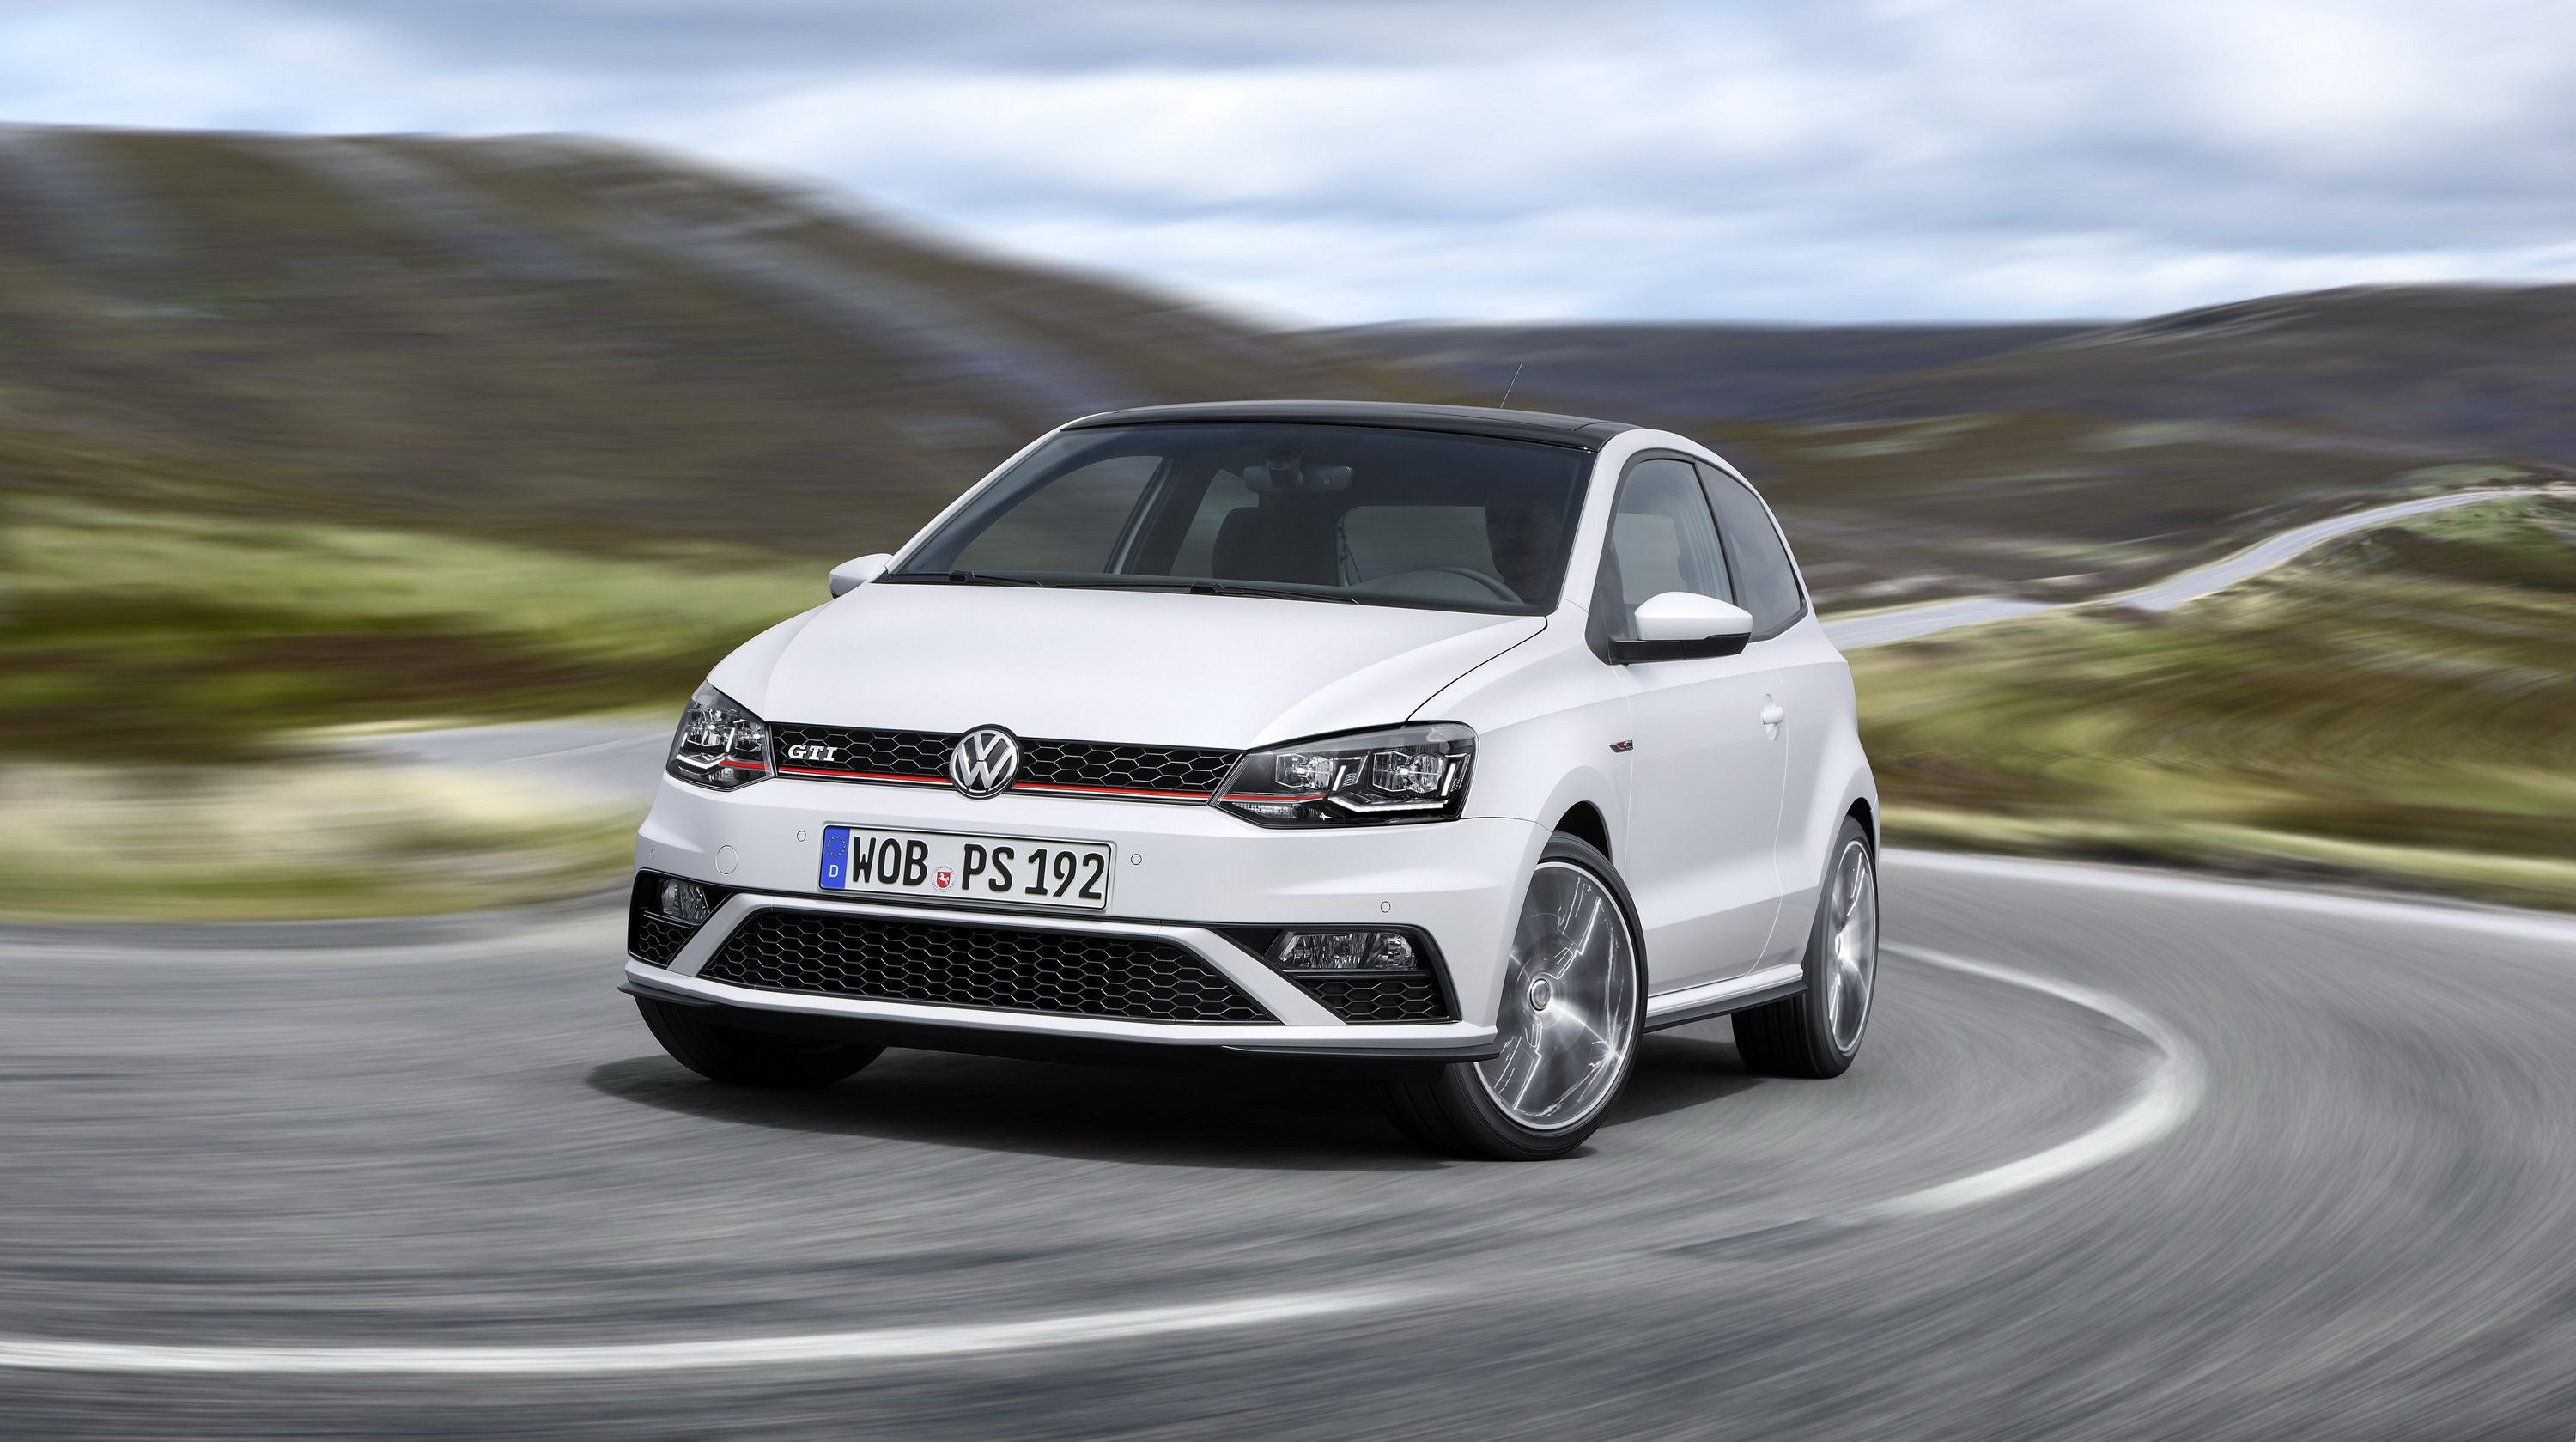  Volkswagen released its new Polo GTI; what would you give to get this hot hatch in the U.S.?